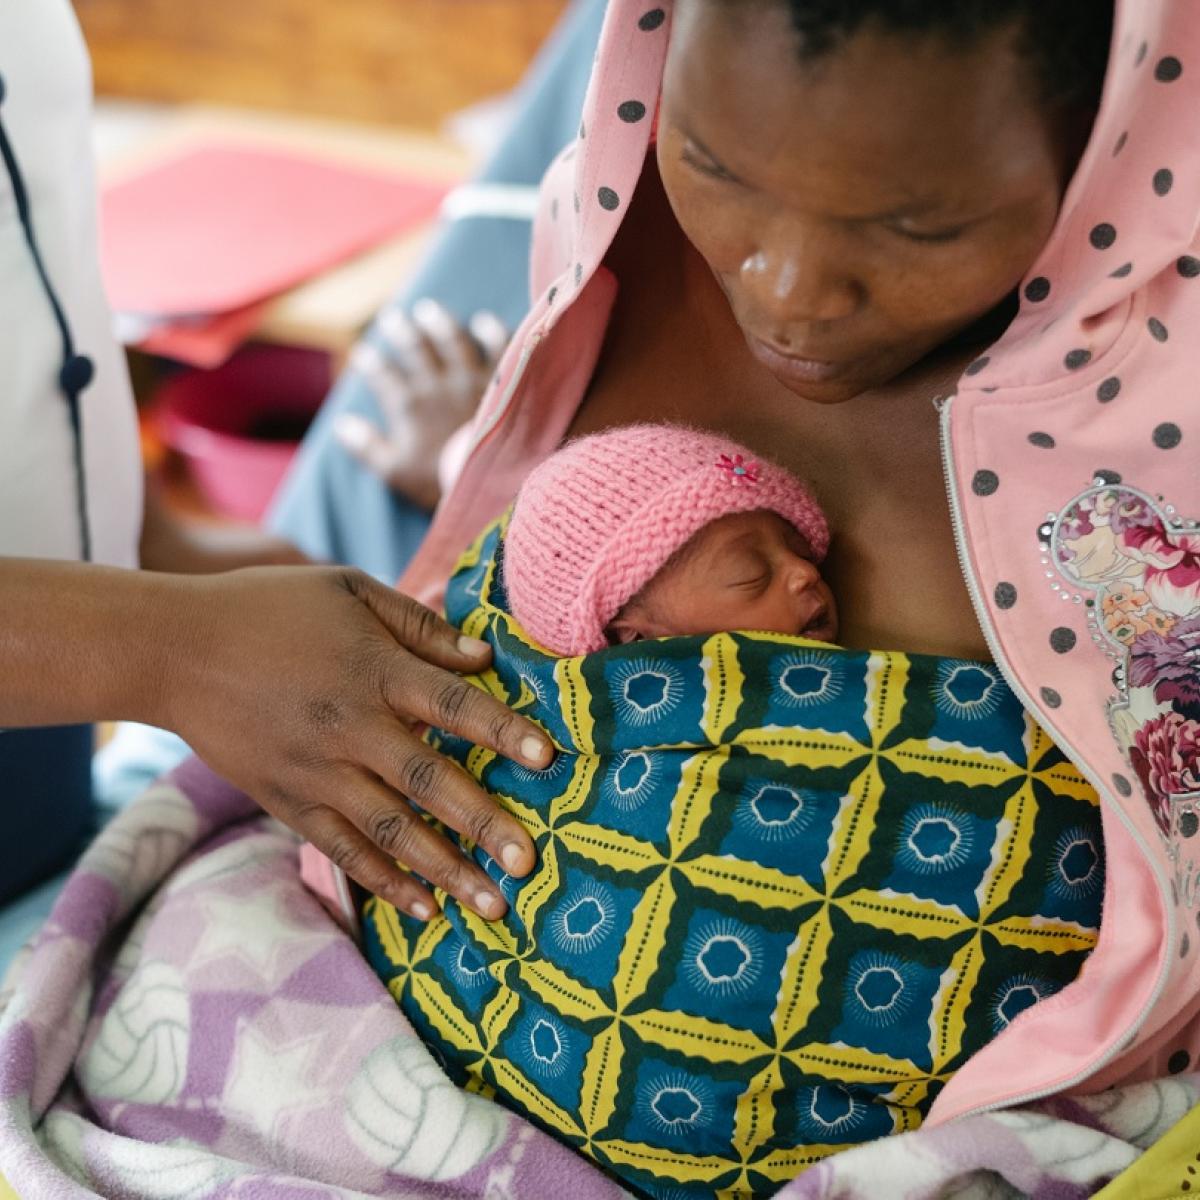 A woman with an infant bundled on her chest.